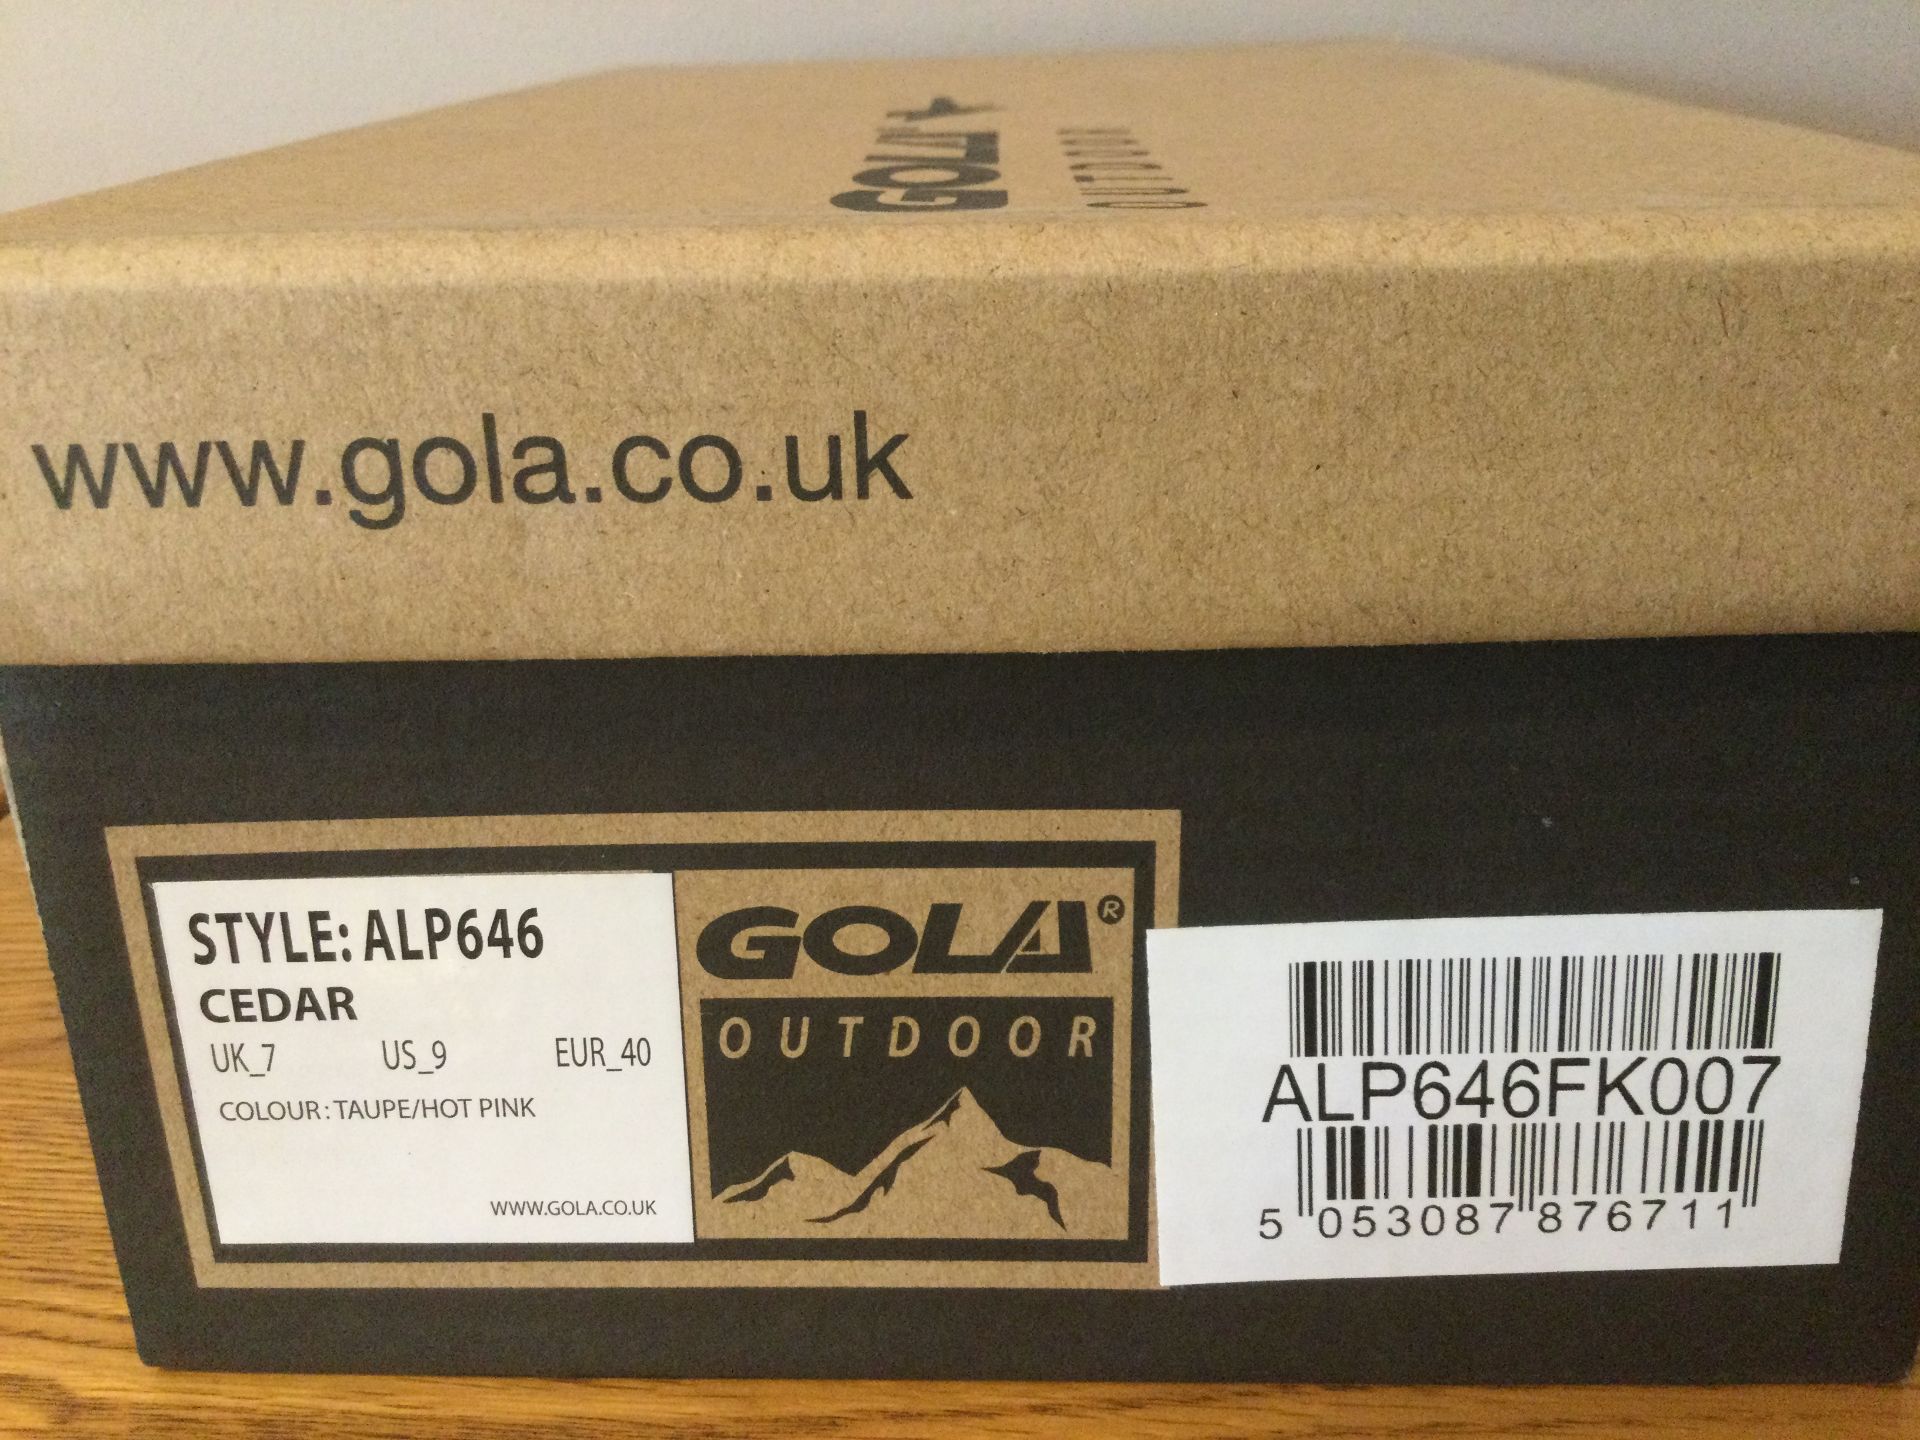 Gola Women's “Cedar” Hiking Sandals, Taupe/Hot Pink, Size 7 - Brand New - Image 4 of 4